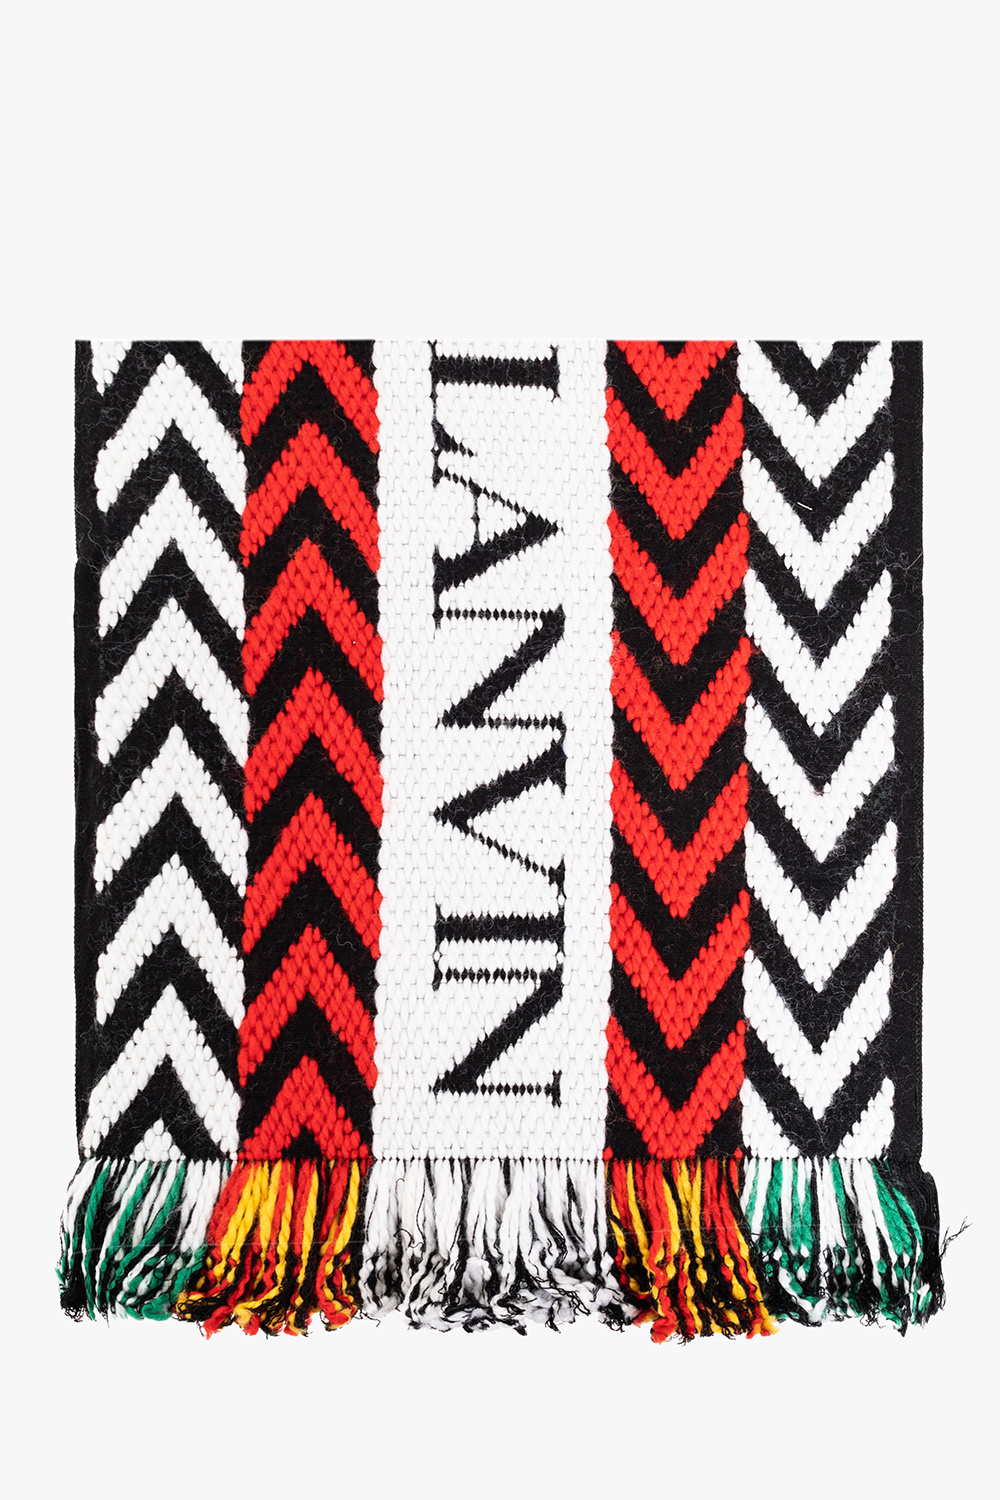 Lanvin Wool scarf with logo